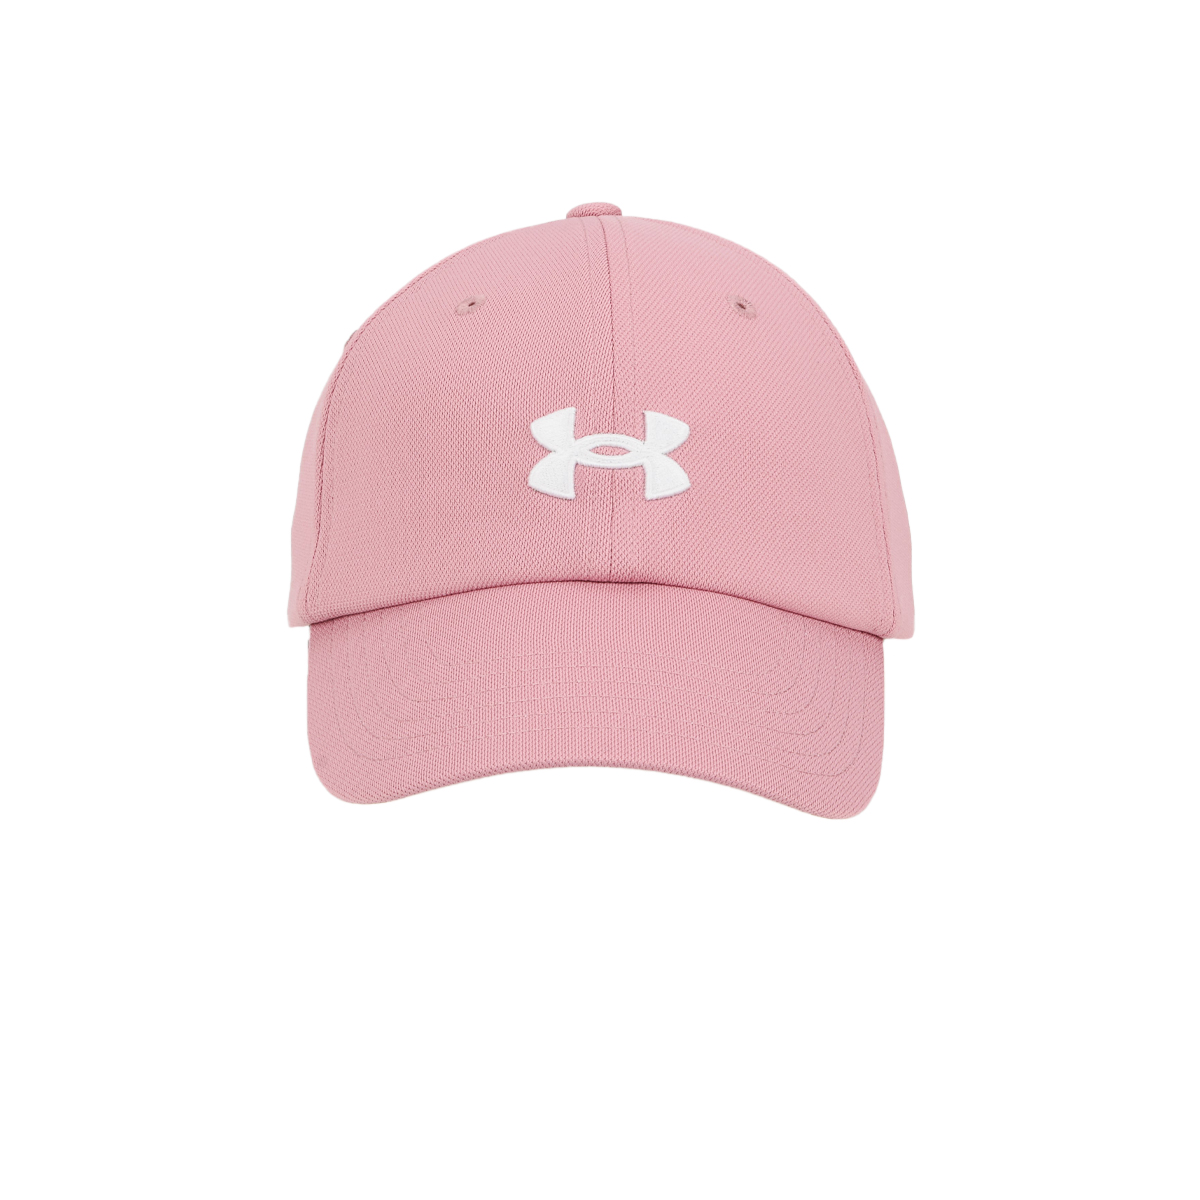 Gorra Entrenamiento Under Armour Blitzing Mujer,  image number null